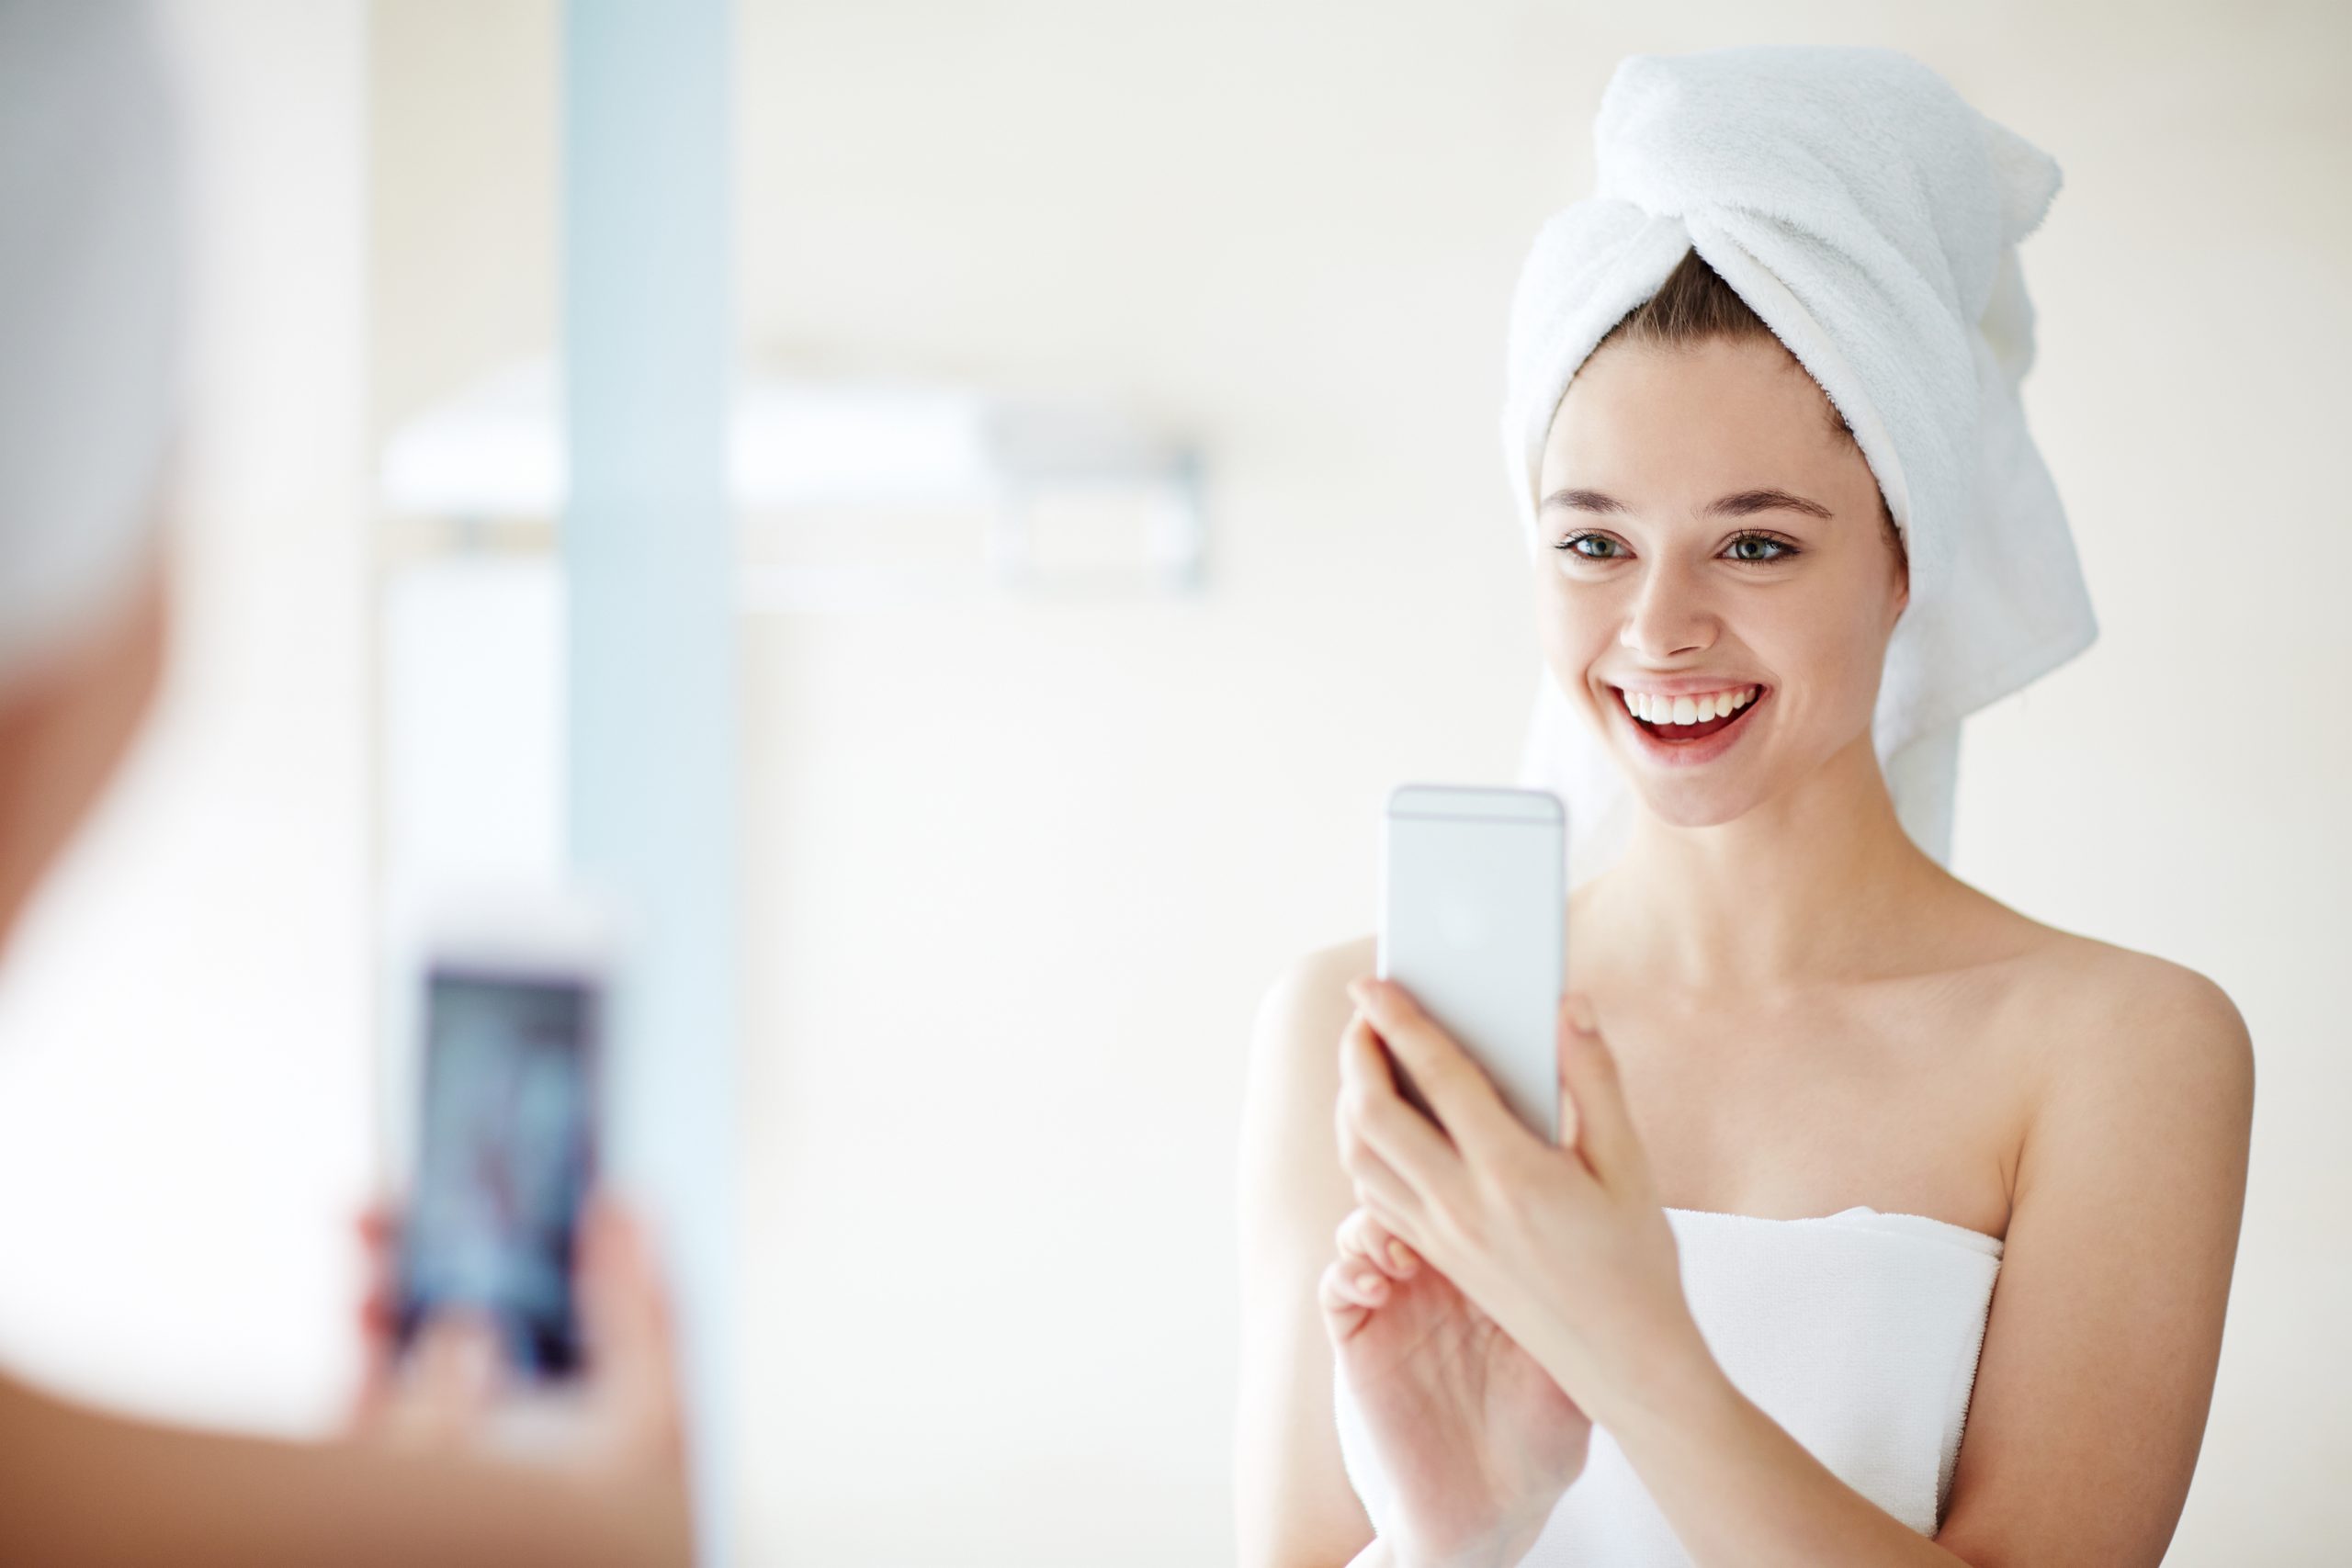 Features of Smart Mirrors